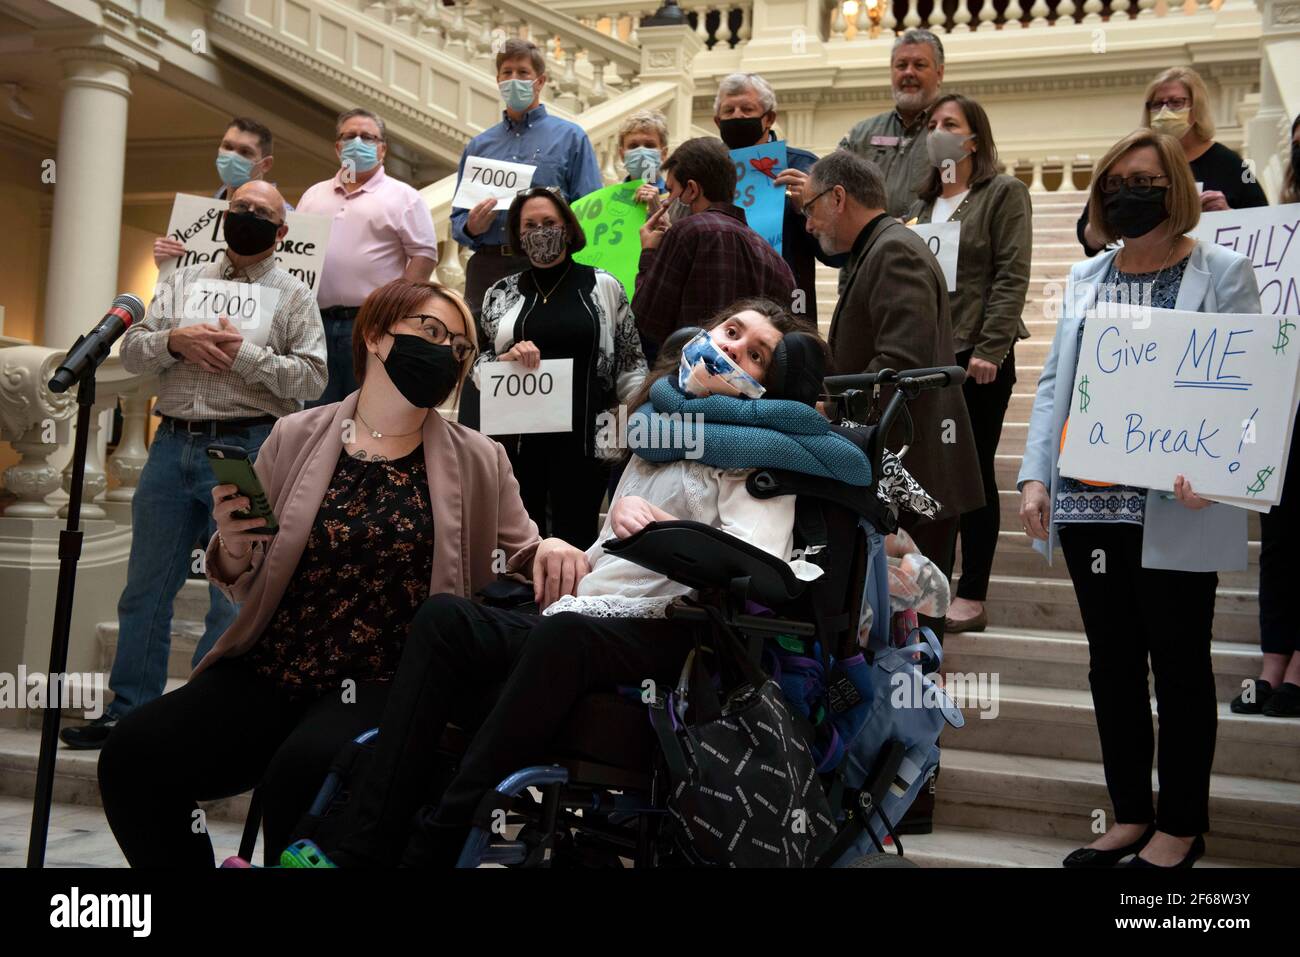 Atlanta, GA, USA. 30th Mar, 2021. Dozens of disability advocates and parents of children with developmental challenges gather for a press conference in GeorgiaÃs statehouse to protest the stateÃs recent budget policy changes that impact 188 medically fragile and vulnerable residents. The new reallocation of funds take effect April 1 and limit the hours available for in-home care. Those cuts increase the possibility of relocation from their homes back into institutionalized care, advocates said. Pictured: Bri James addresses crowd on behalf of her non-verbal sister Callie Moore, one of the 1 Stock Photo